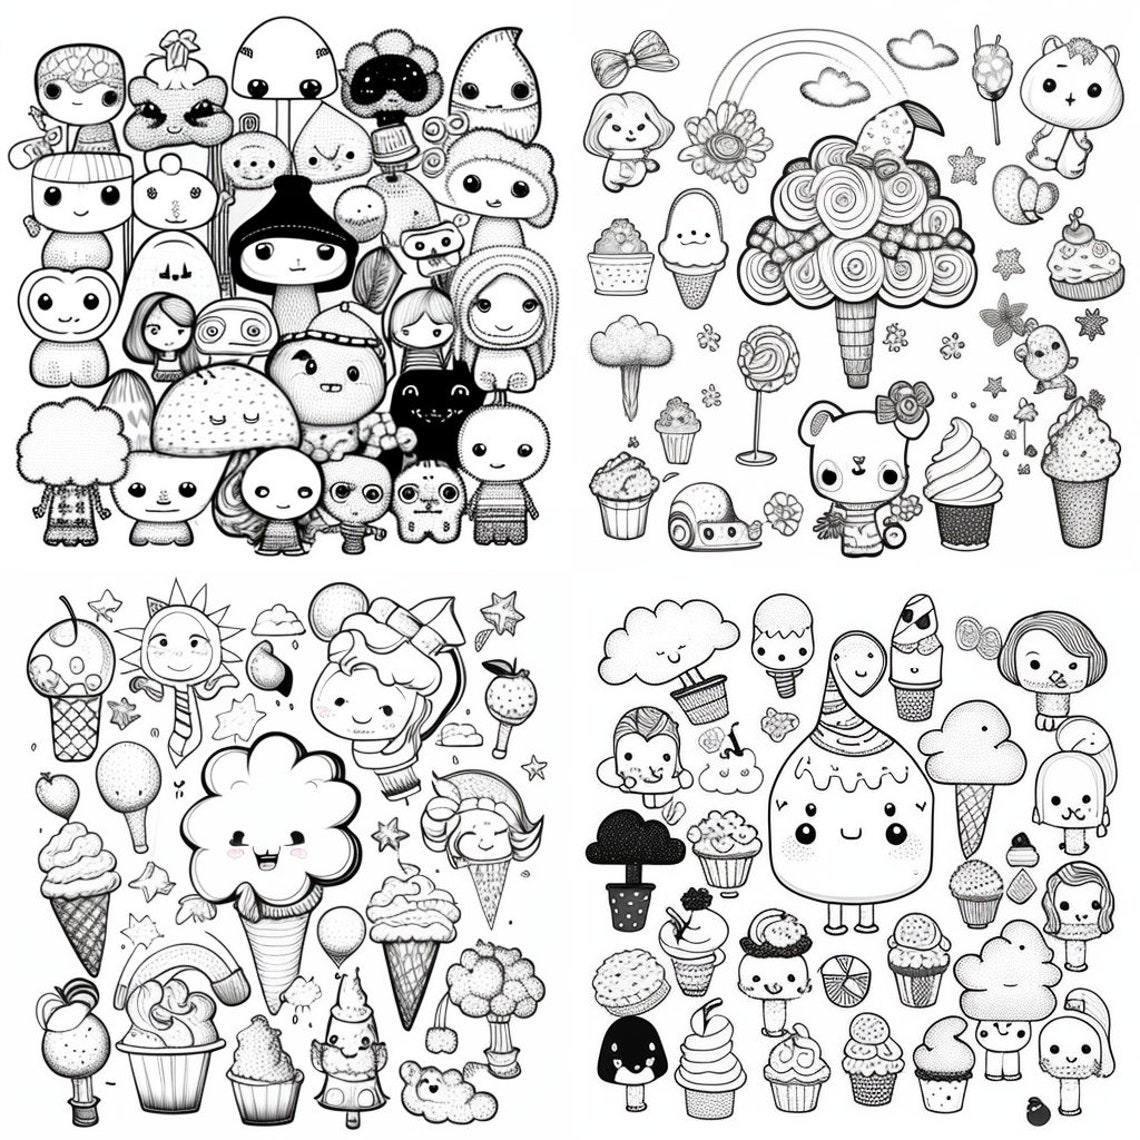 Printable 28 Page Kawaii Junk Coloring Book for Adults and Kids ...